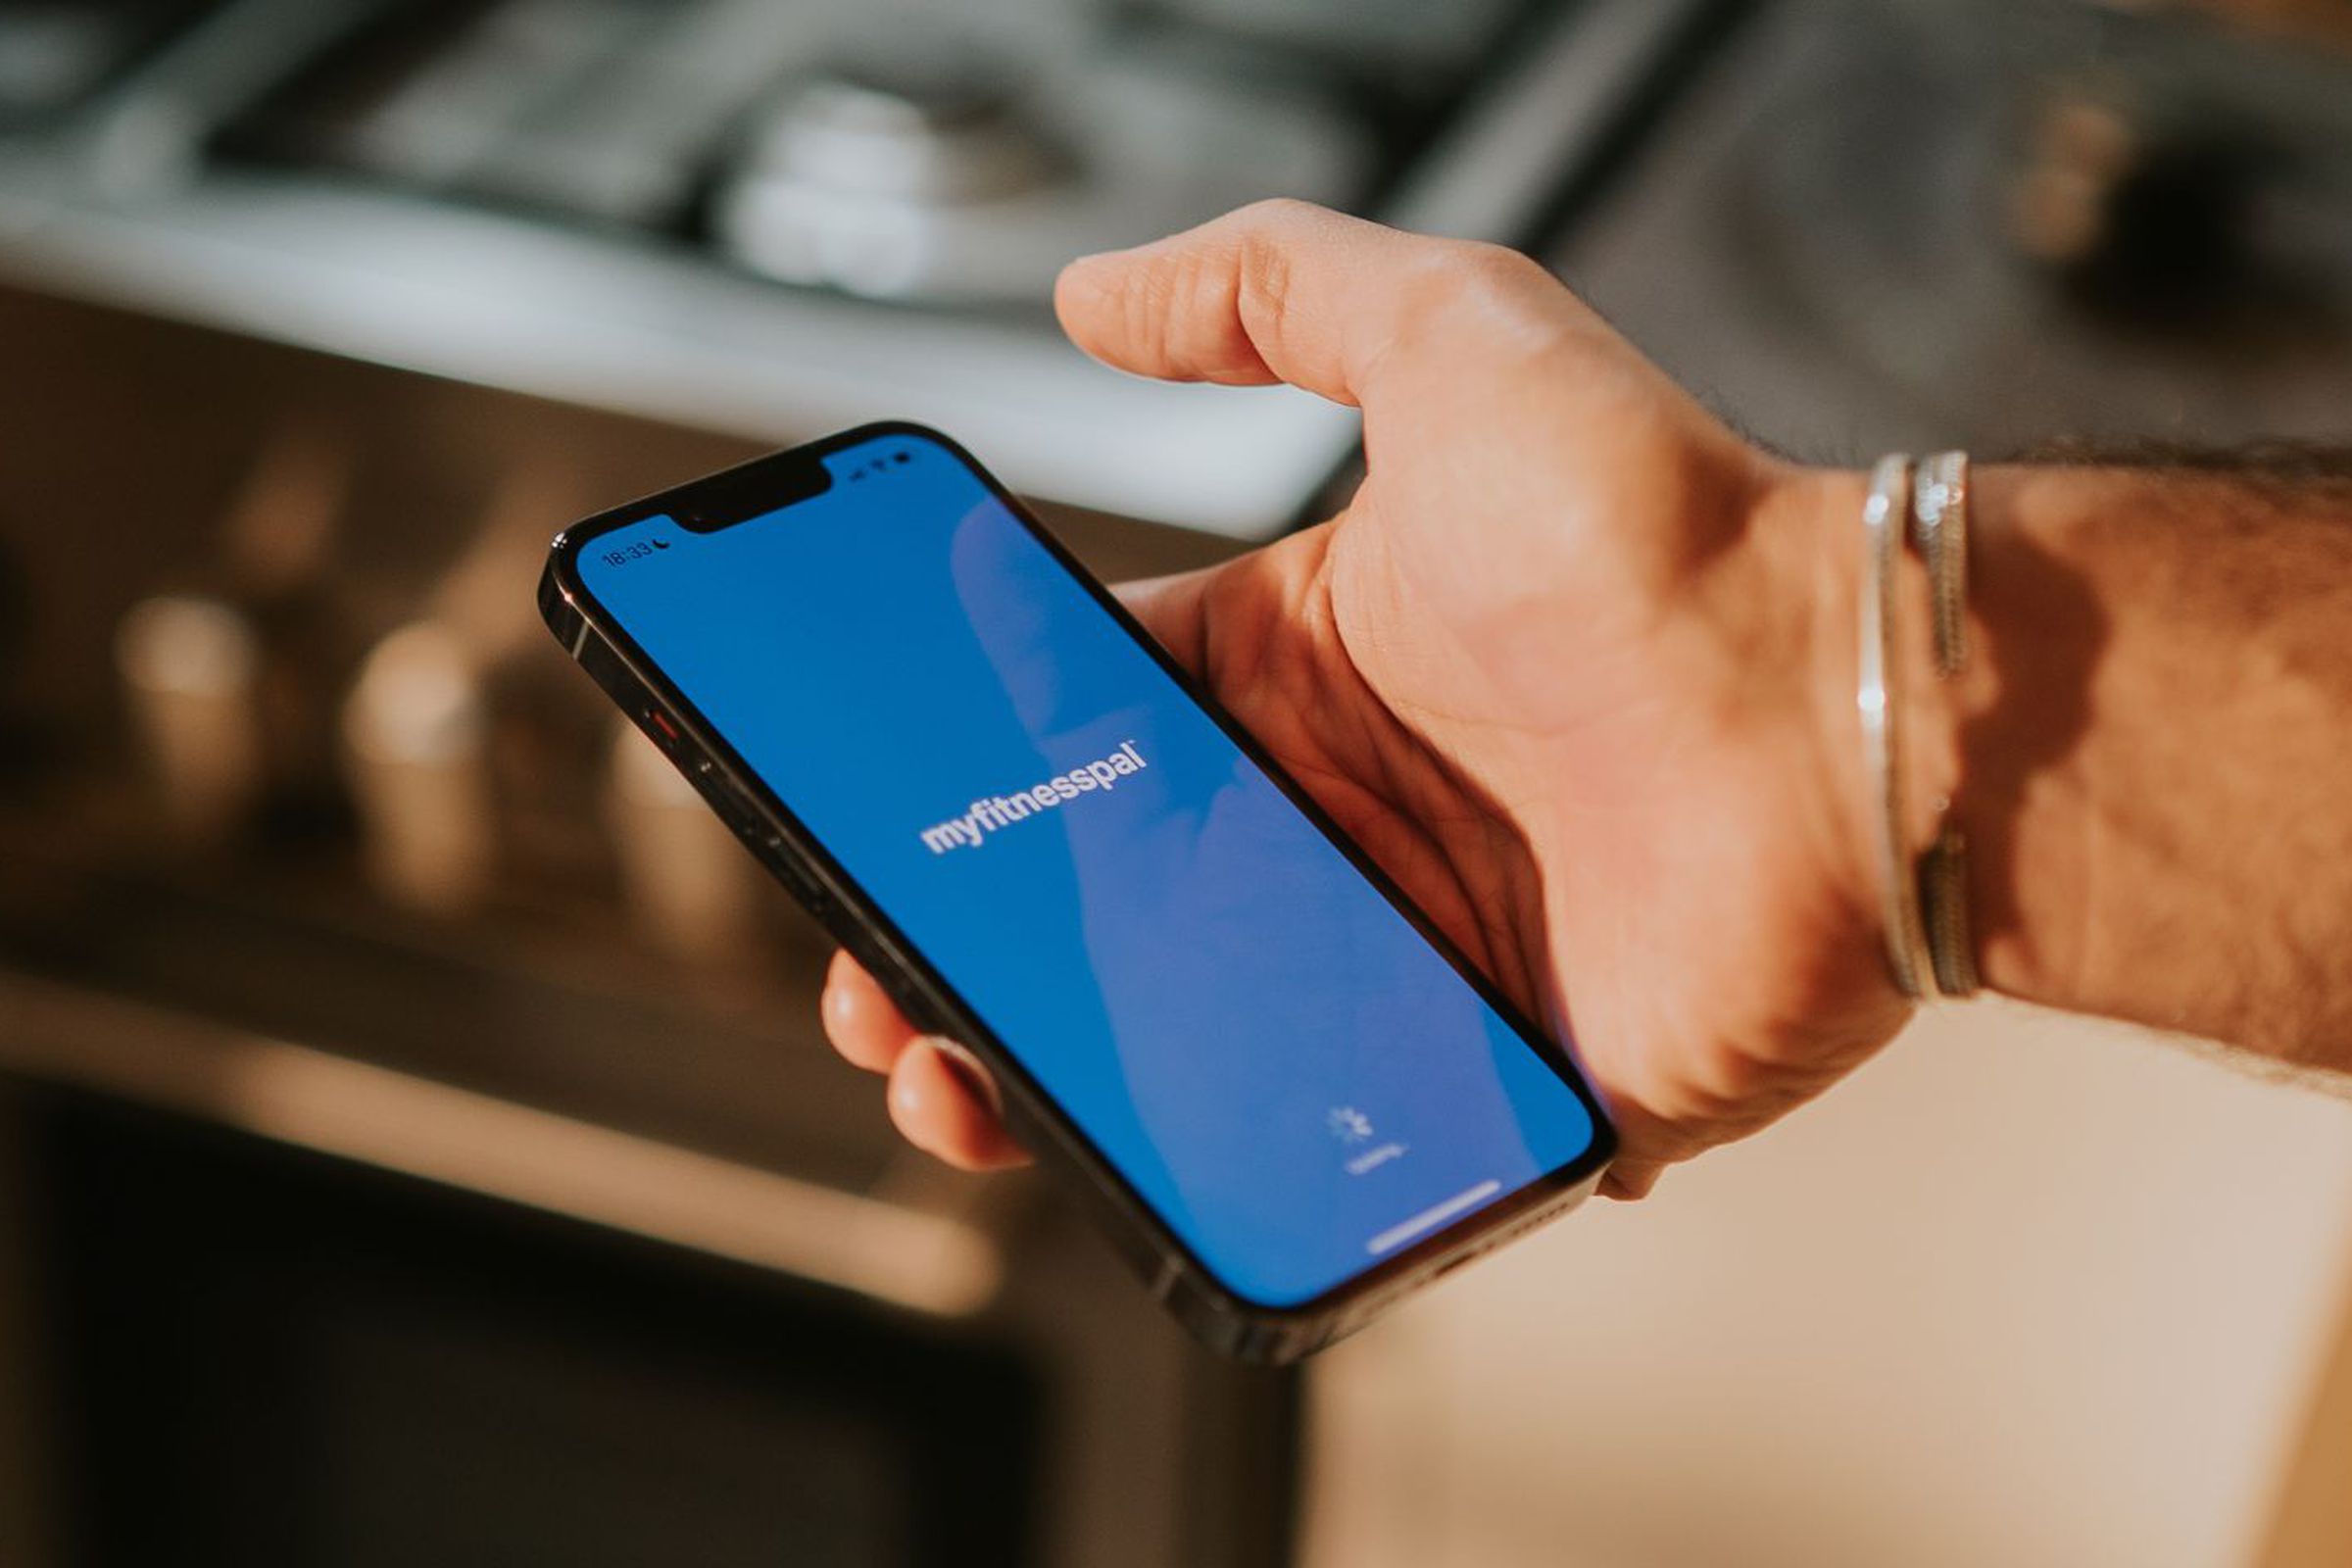 MyFitnessPal’s planned change comes after new ownership in late 2020 and a recent app redesign.